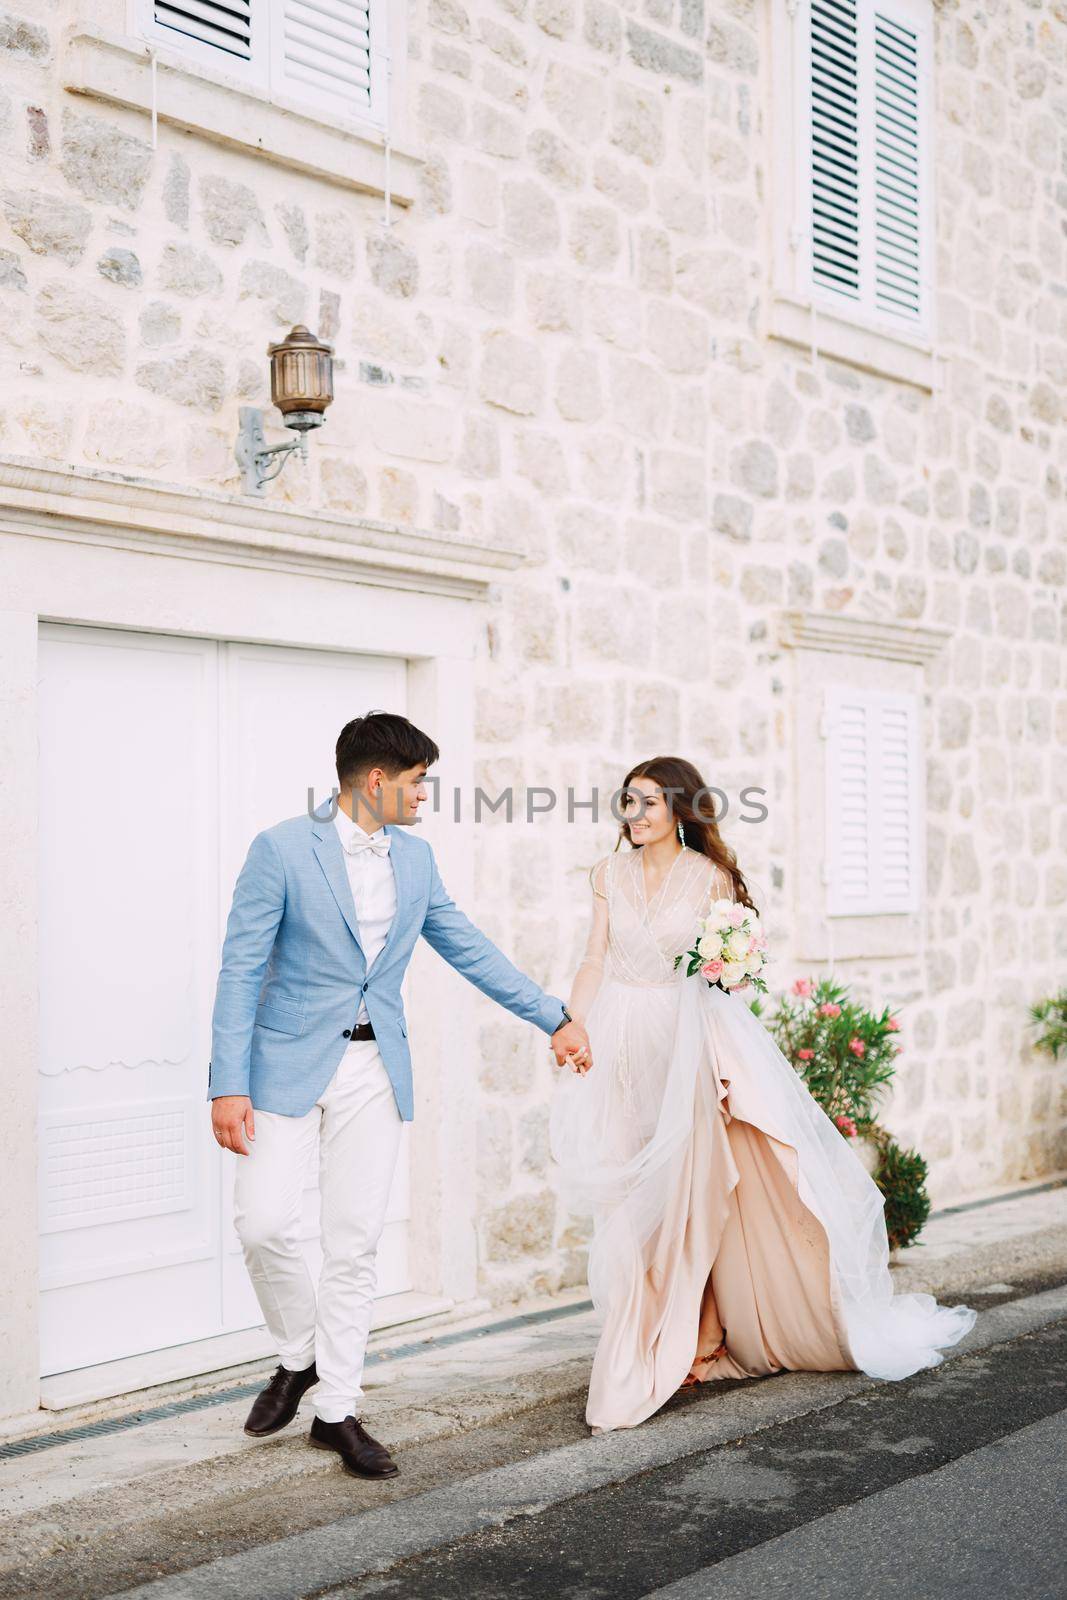 The bride and groom stand holding hands in front of a beautiful white house in the old town of Perast by Nadtochiy